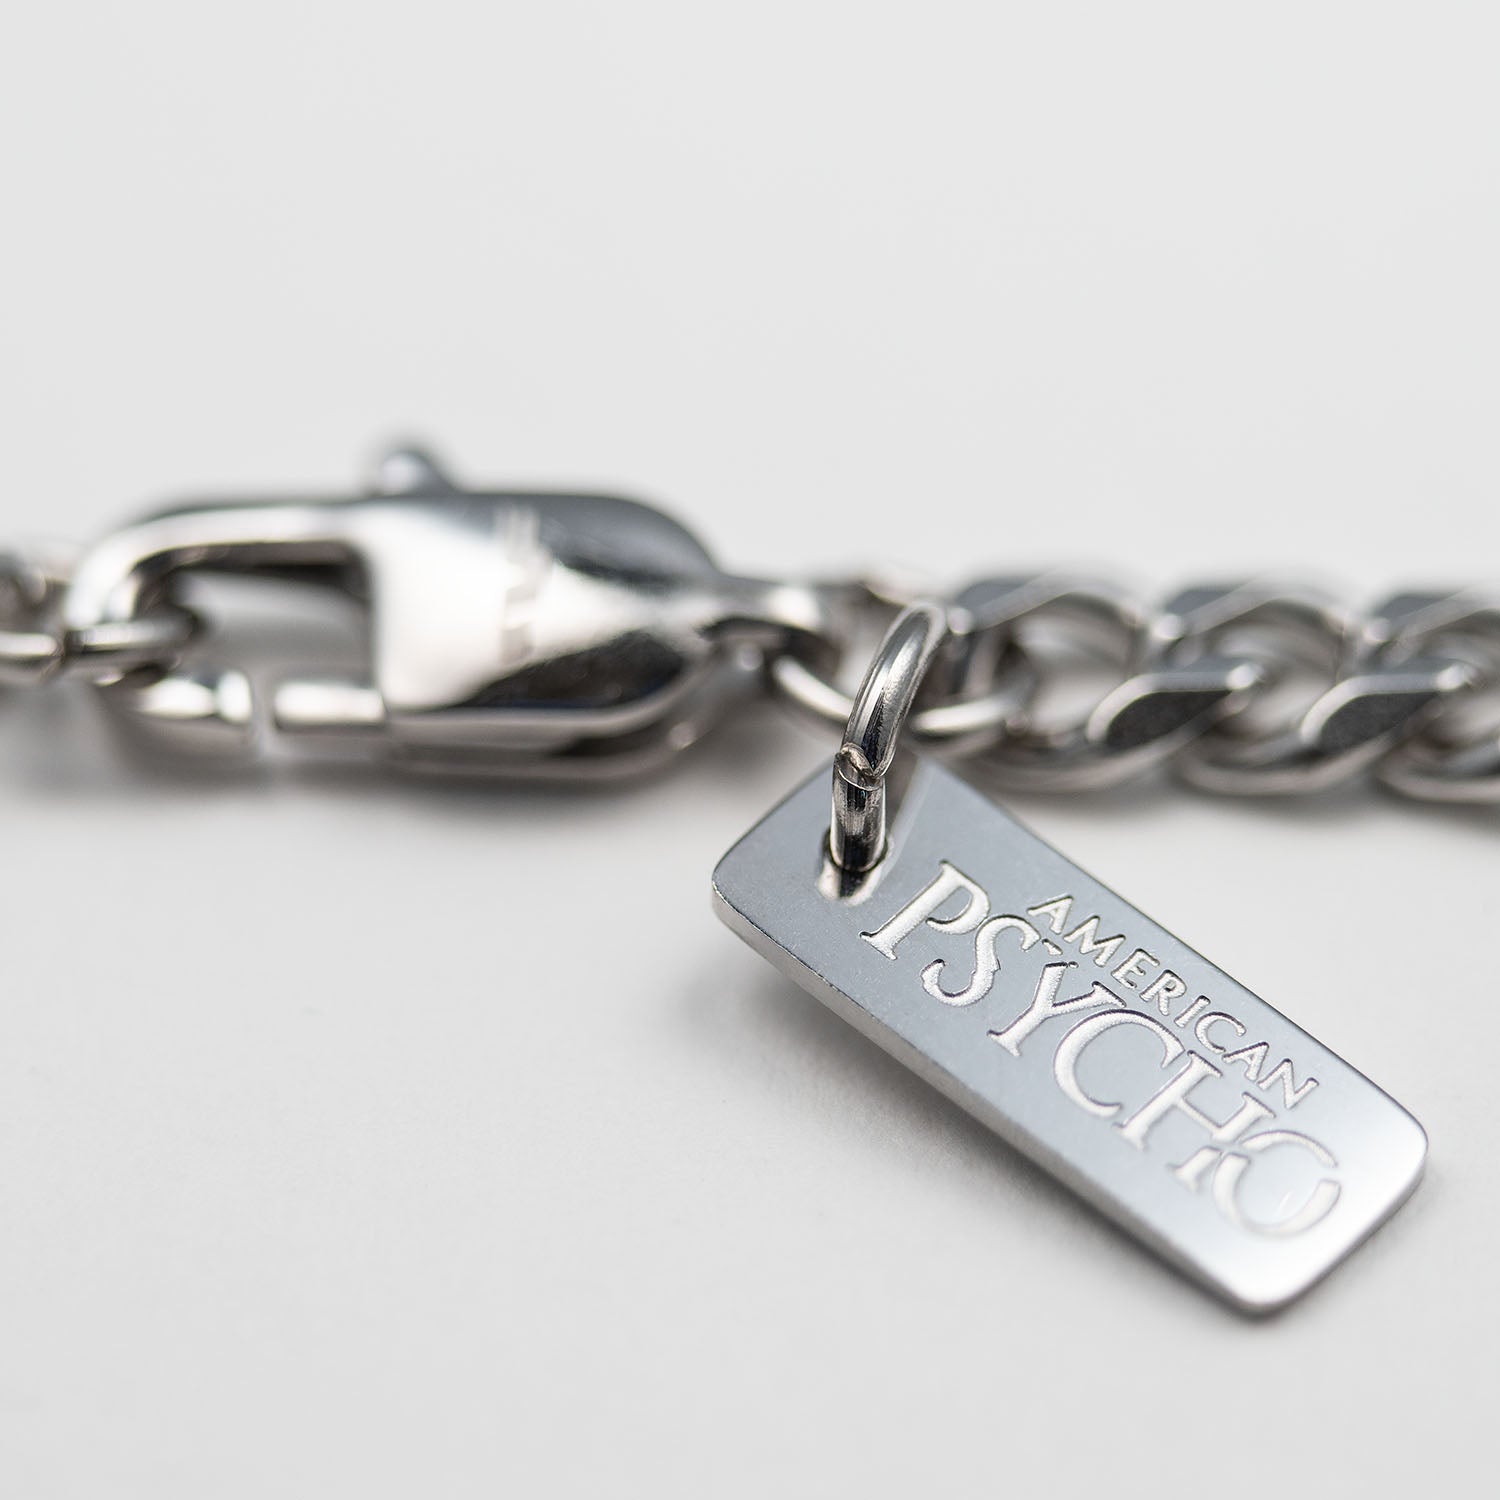 Detailed view of the Personal Fears X American Psycho Nail Gun Necklace tag